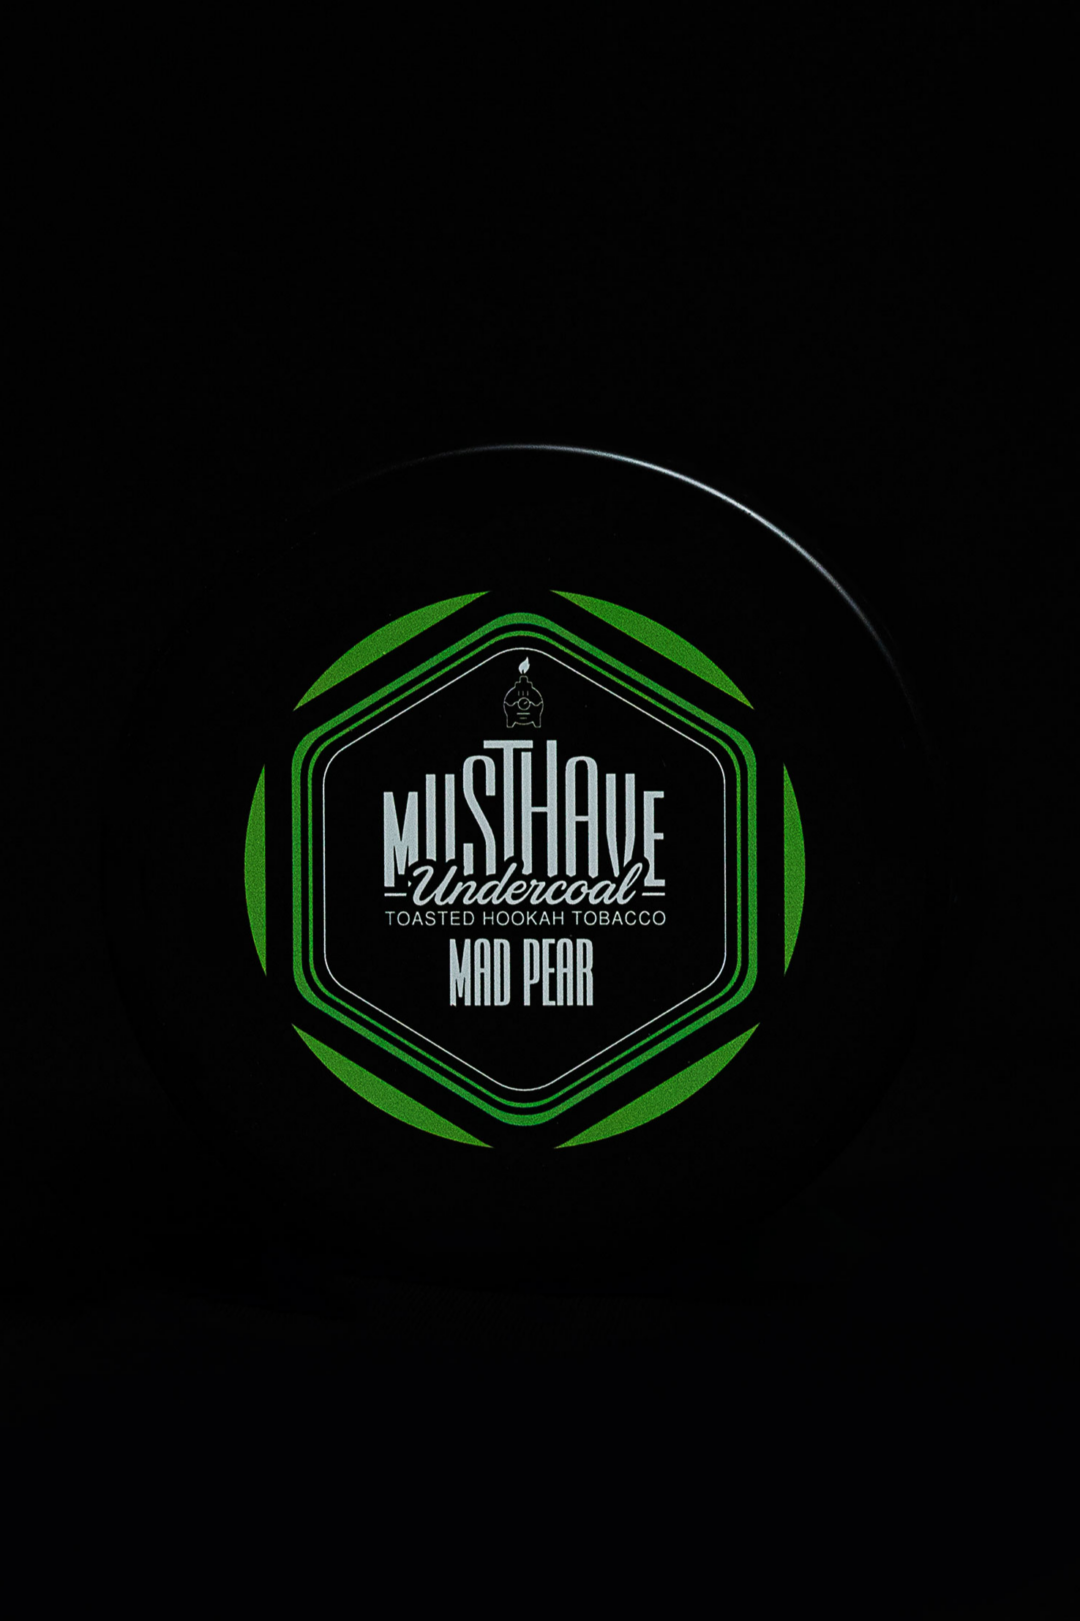 Musthave MAD PEAR